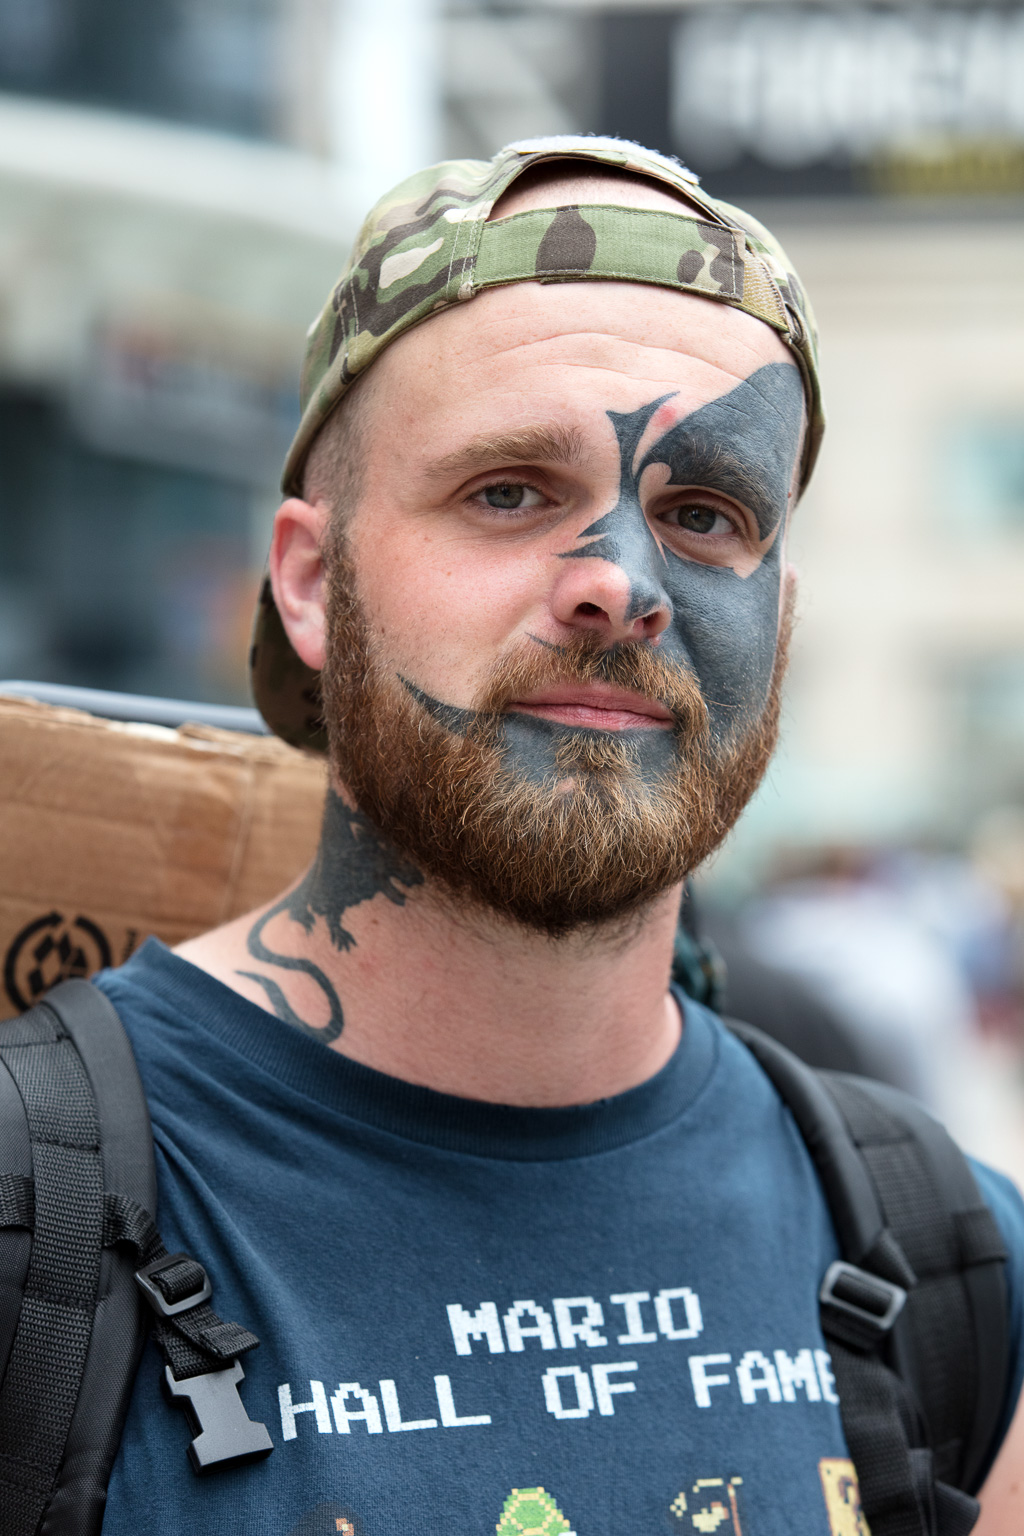 Man wearing backward baseball cap and with tattoo on his face.